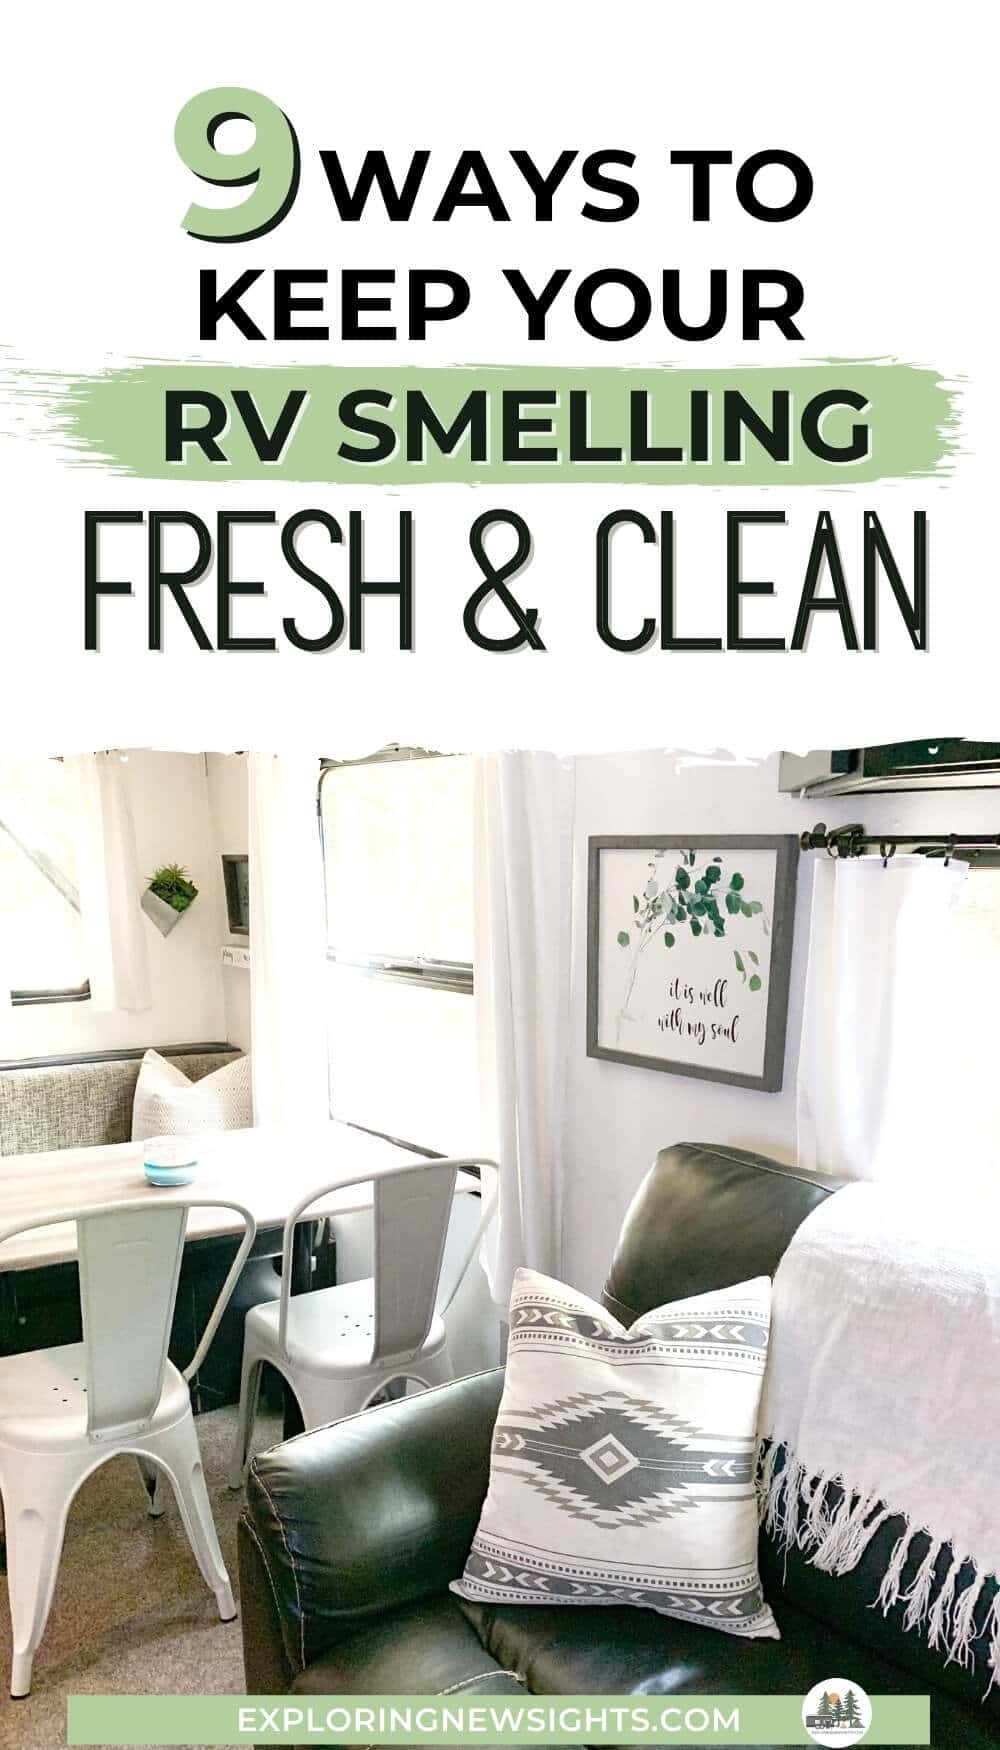 RV Smells | How to Keep Your RV Smelling Fresh and Clean